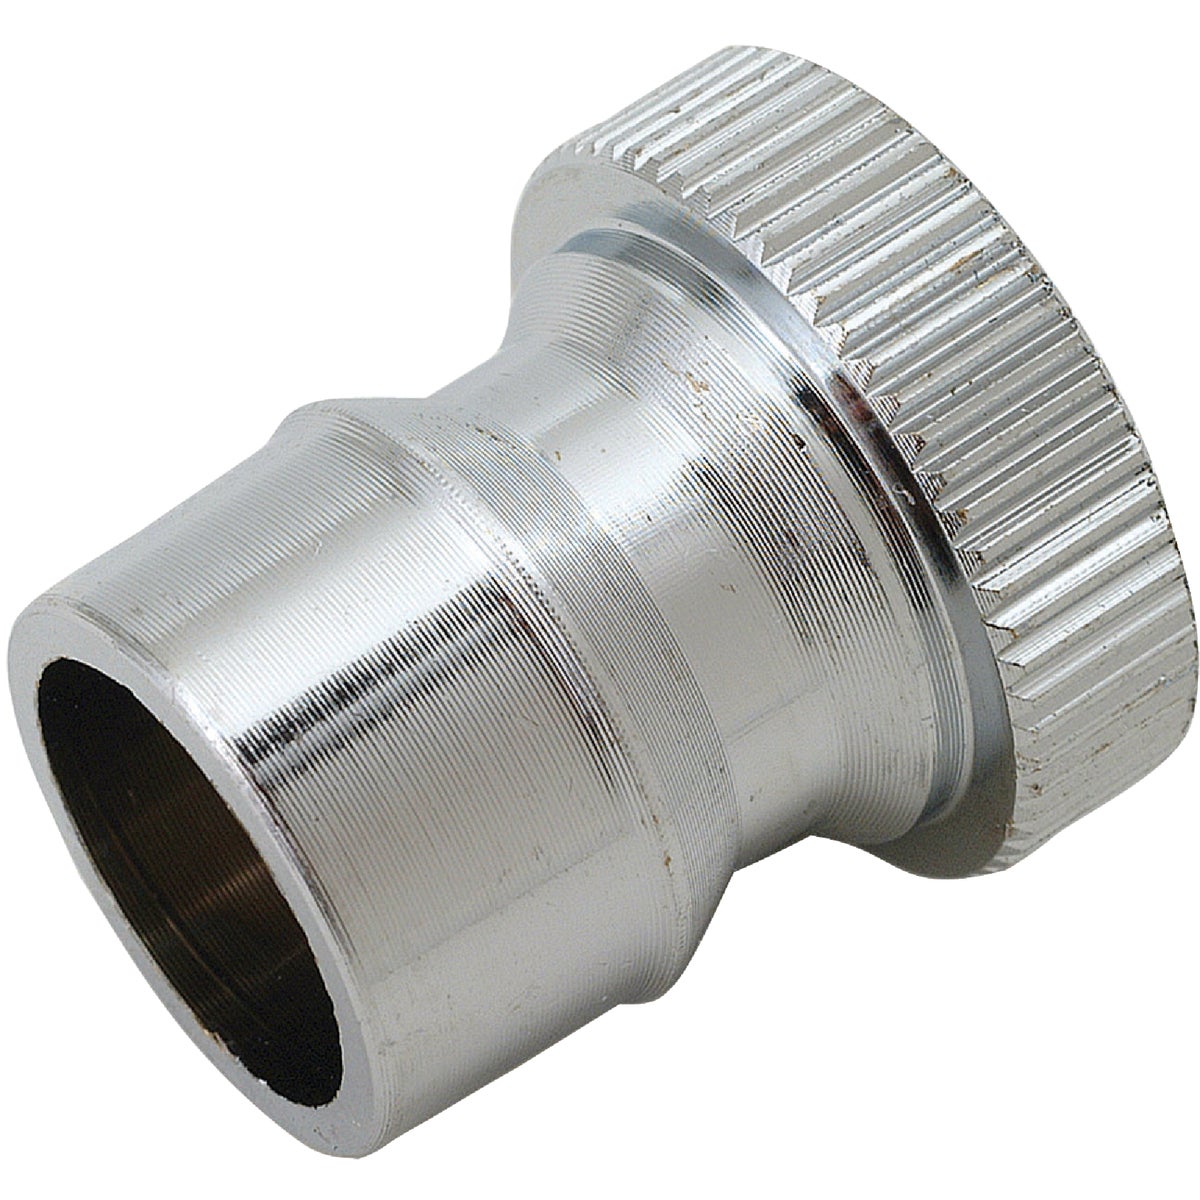 Item 401344, Aerator adapter features female snap fitting for various small diameter 